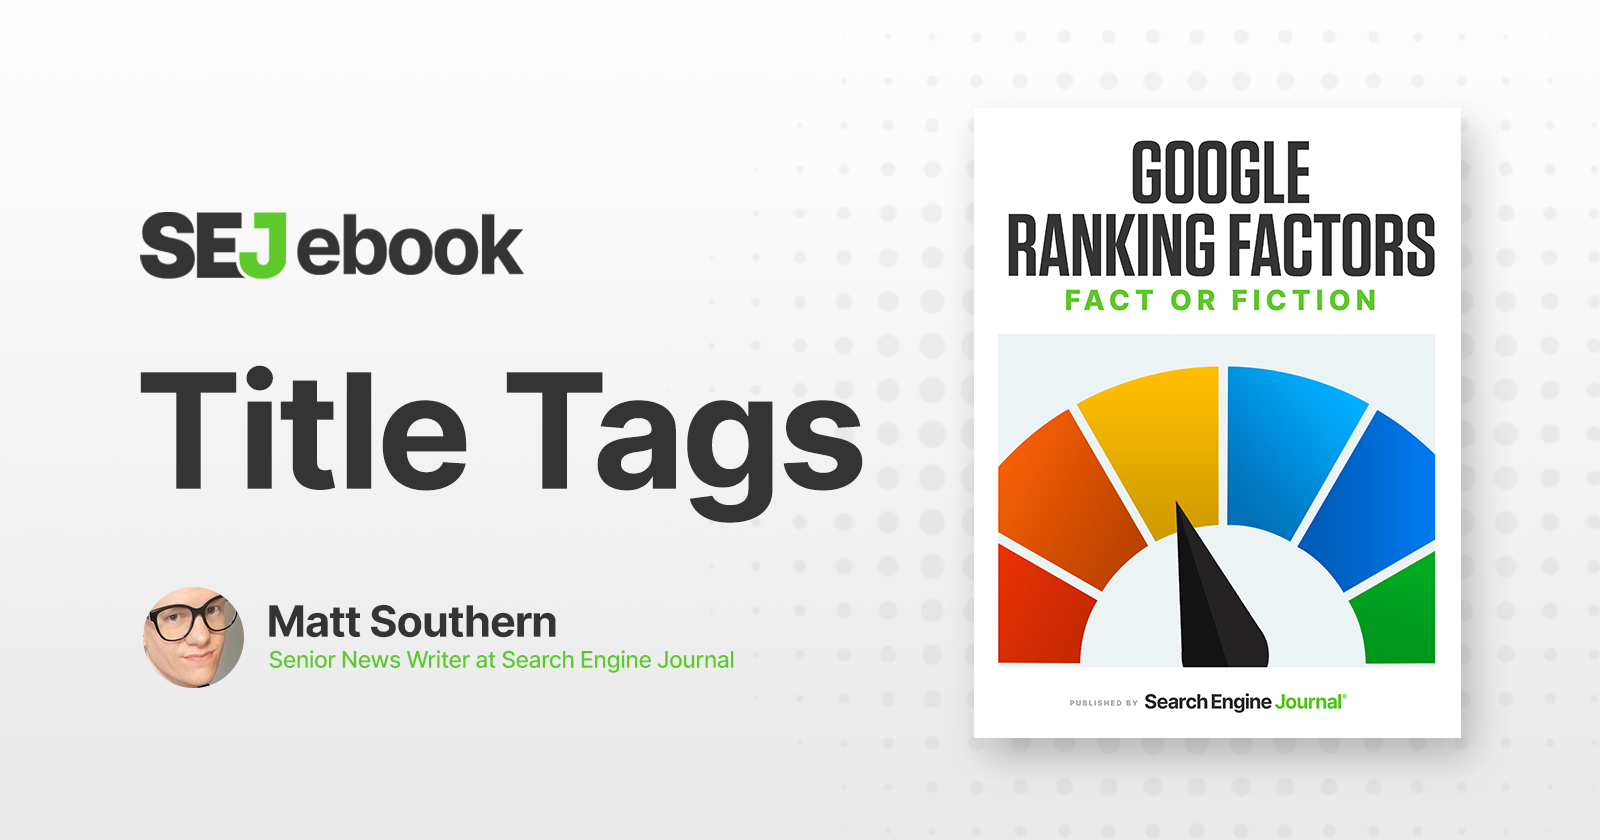 Are Title Tags A Google Rating Issue?